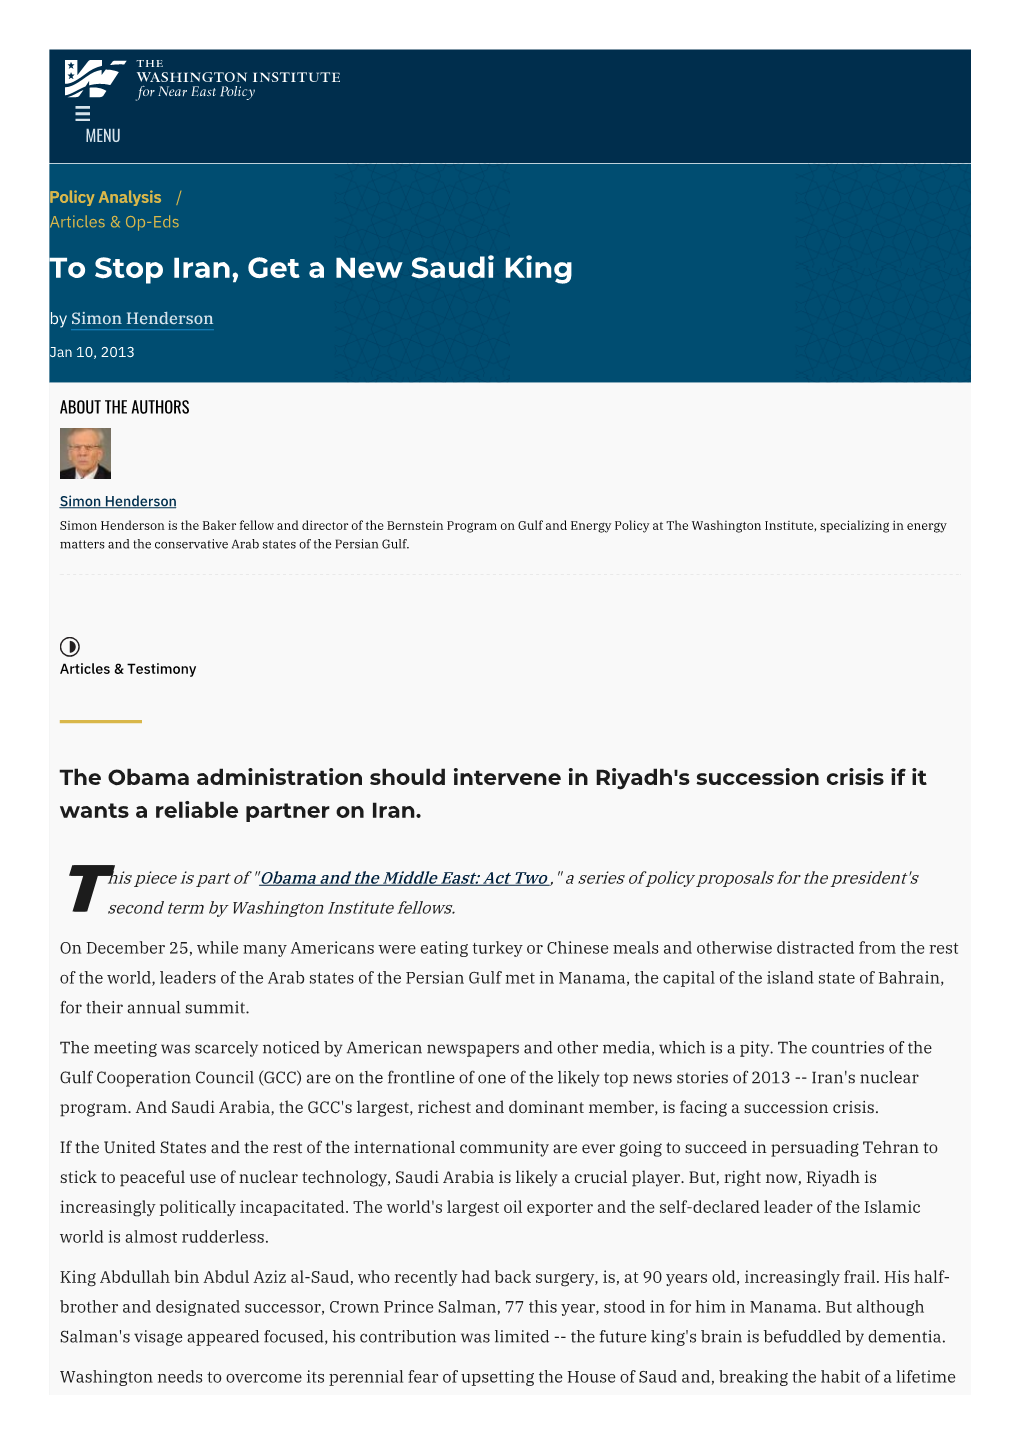 To Stop Iran, Get a New Saudi King | the Washington Institute